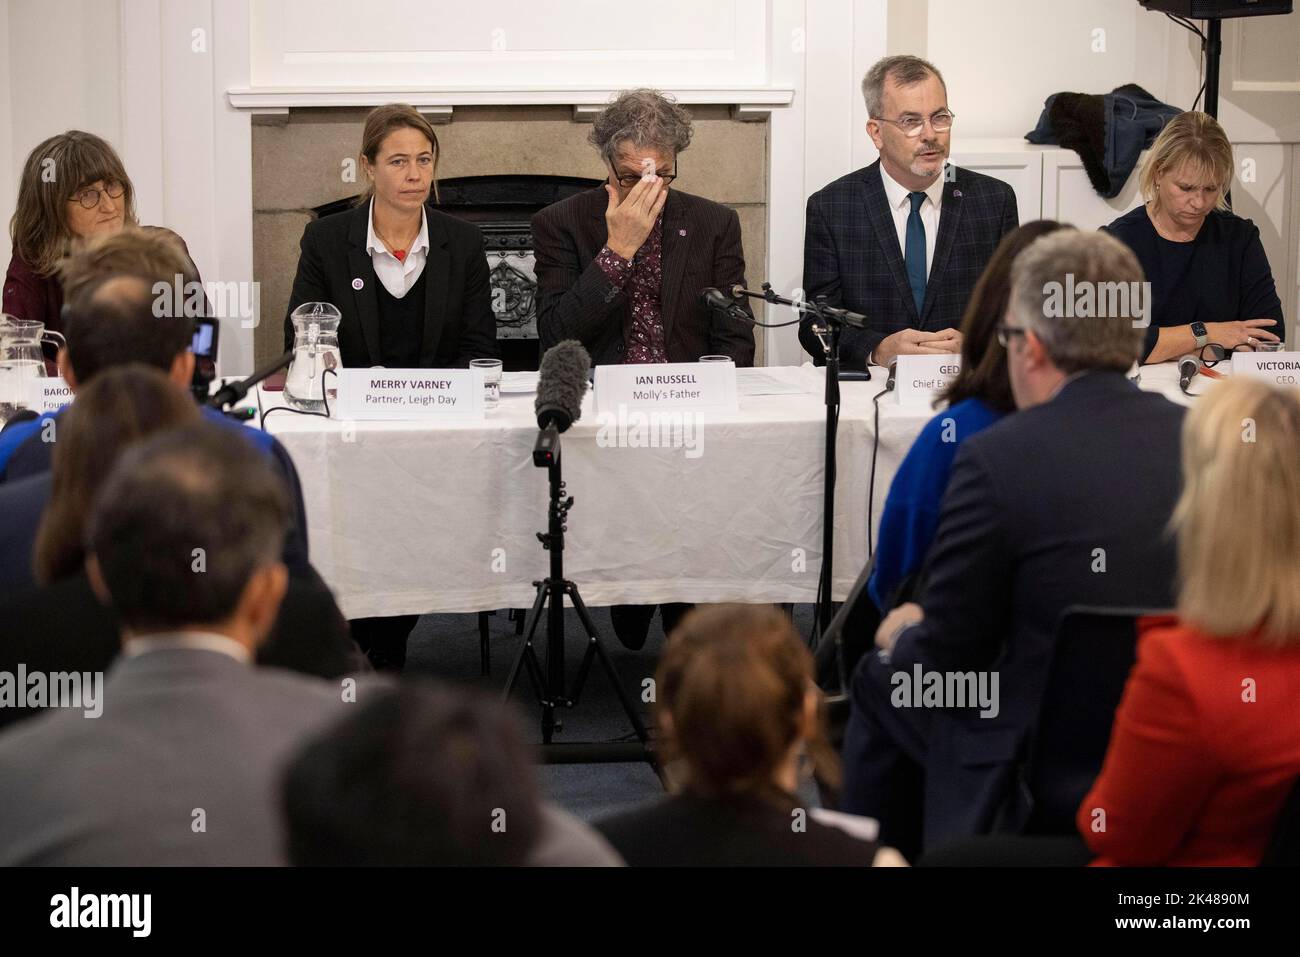 London, UK. 30th Sep, 2022. PHOTO:JEFF GILBERT 30th September 2022 Barnet, North London, UK Baroness Beeban Kidron (far left)  alongside Ian Russell (Molly's father), at a press conference on the final day of the Molly Russell inquest at North London CoronoerÕs Court. Credit: Jeff Gilbert/Alamy Live News Stock Photo